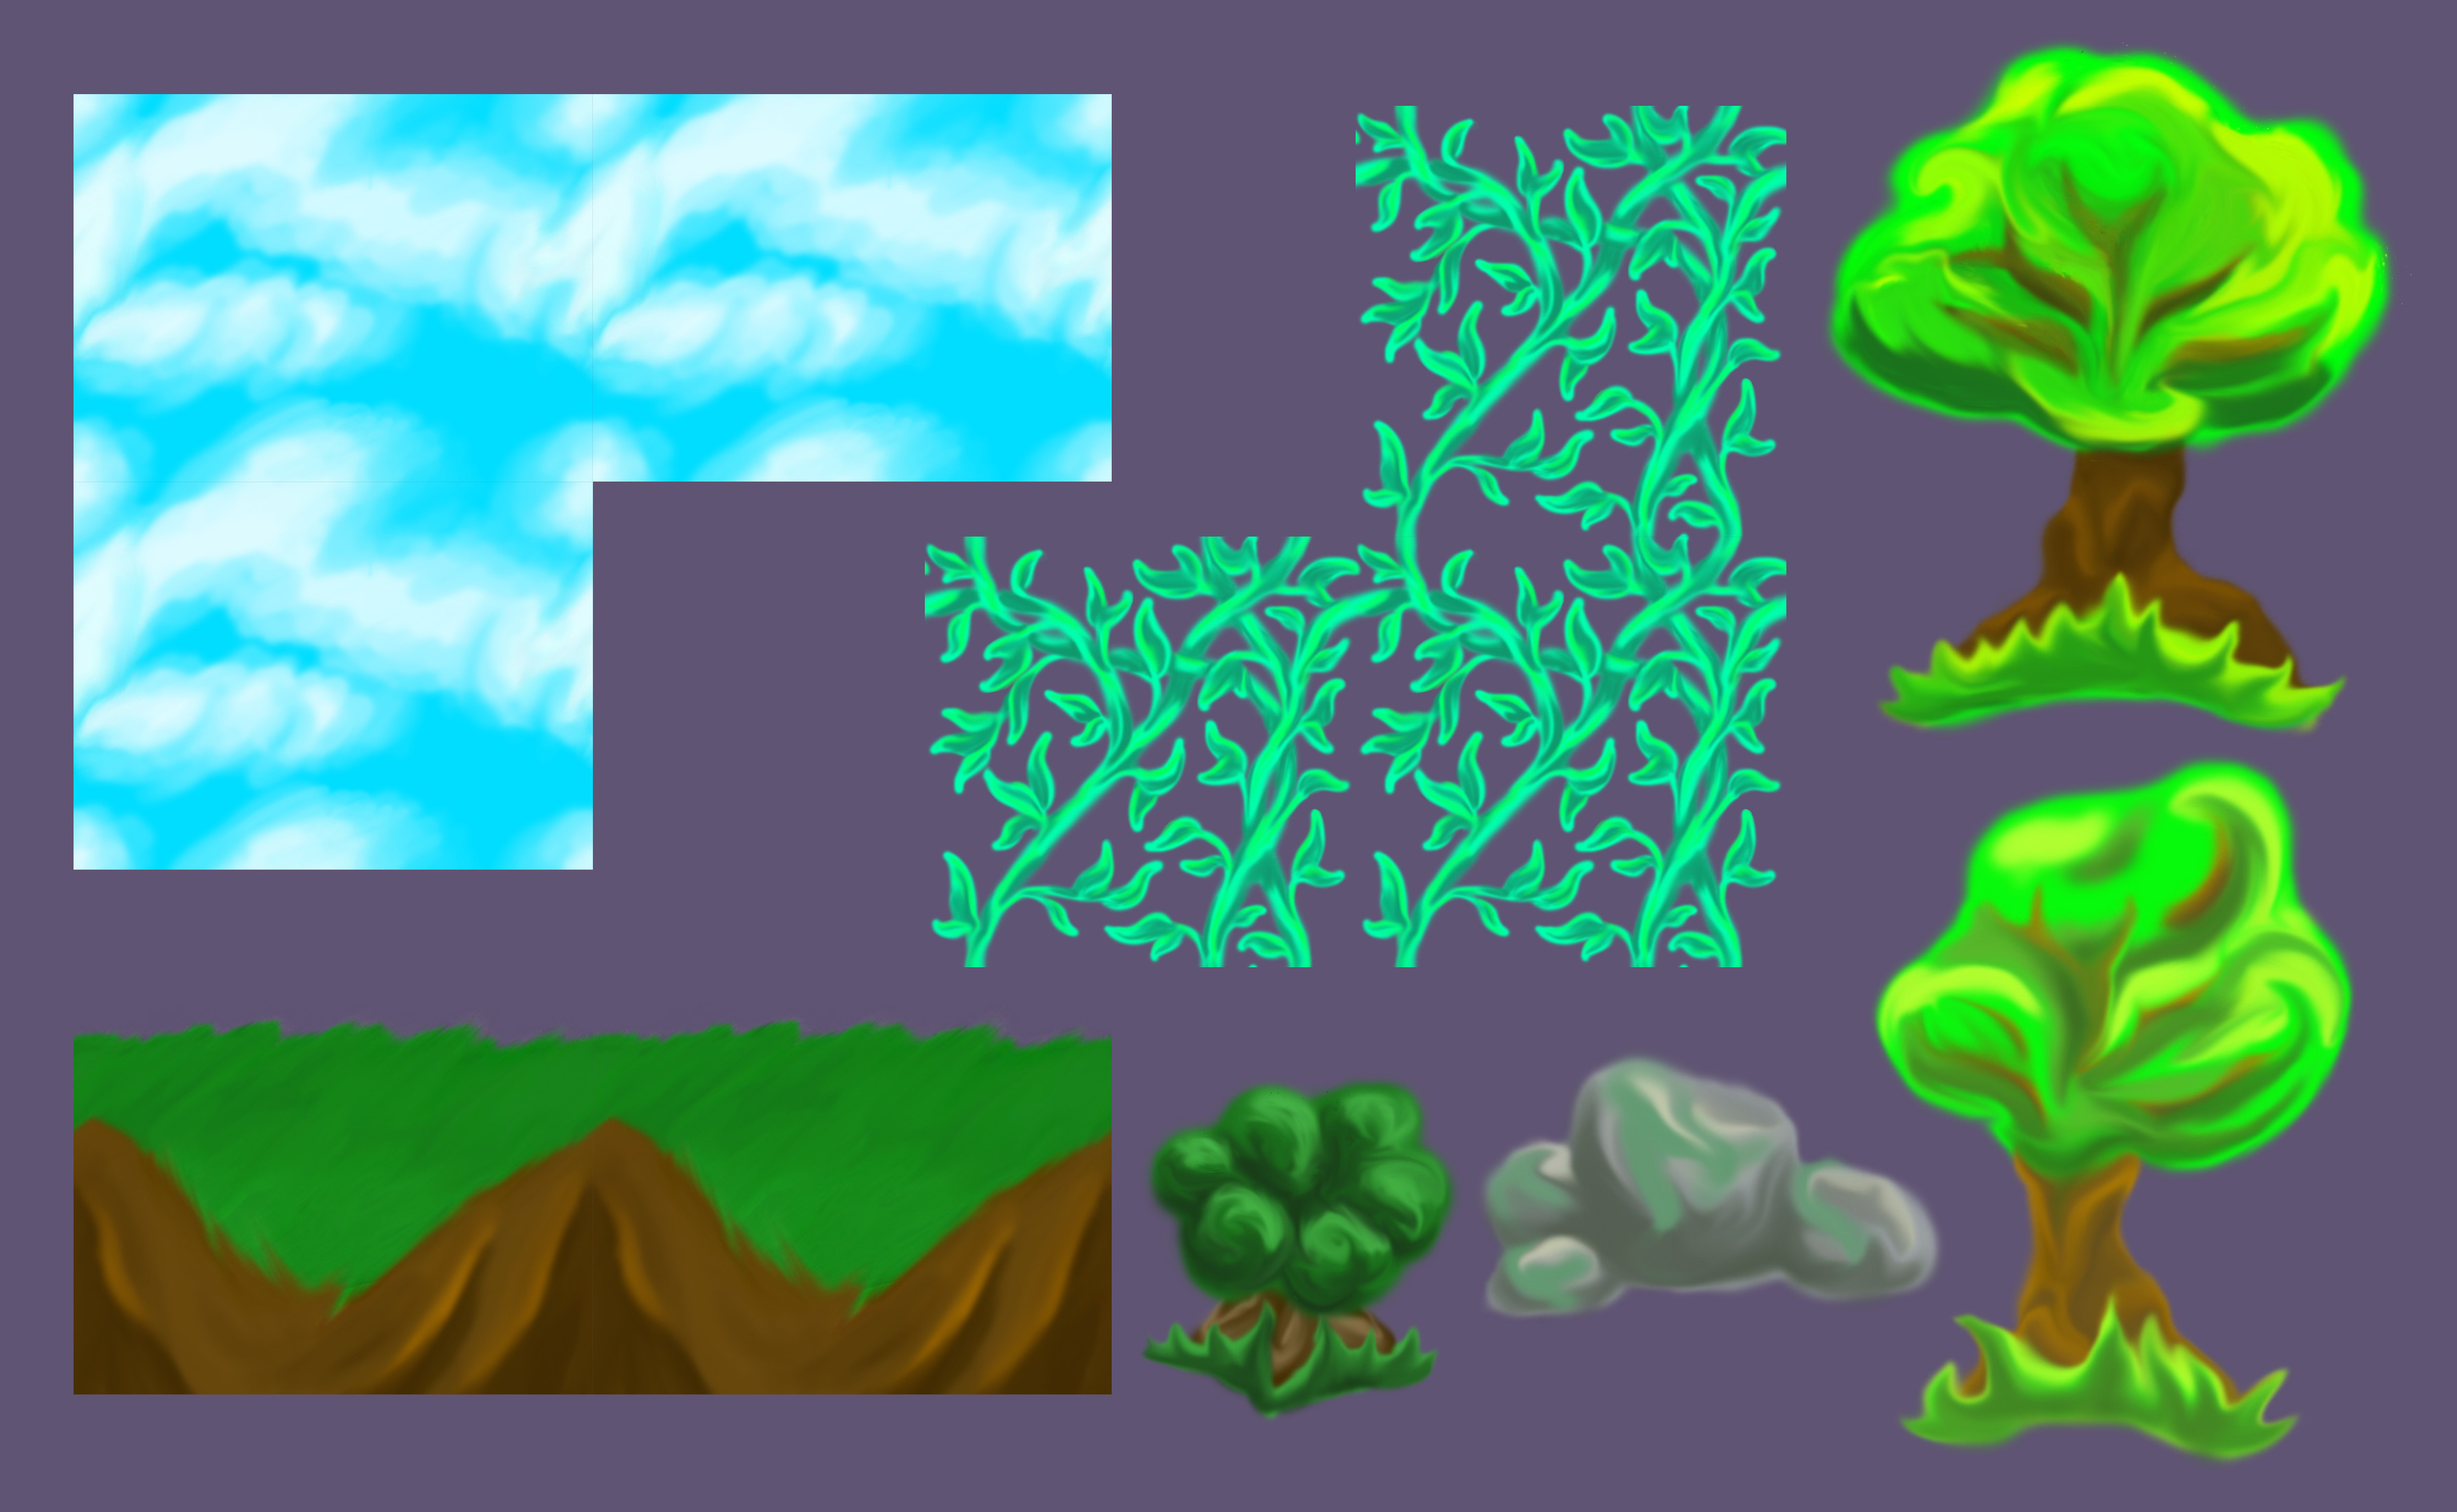 Background Assets for the Forest areas of the game. The Ground, Sky and Vines all tile (as shown), while other assets are made to be placed to populate areas as needed.